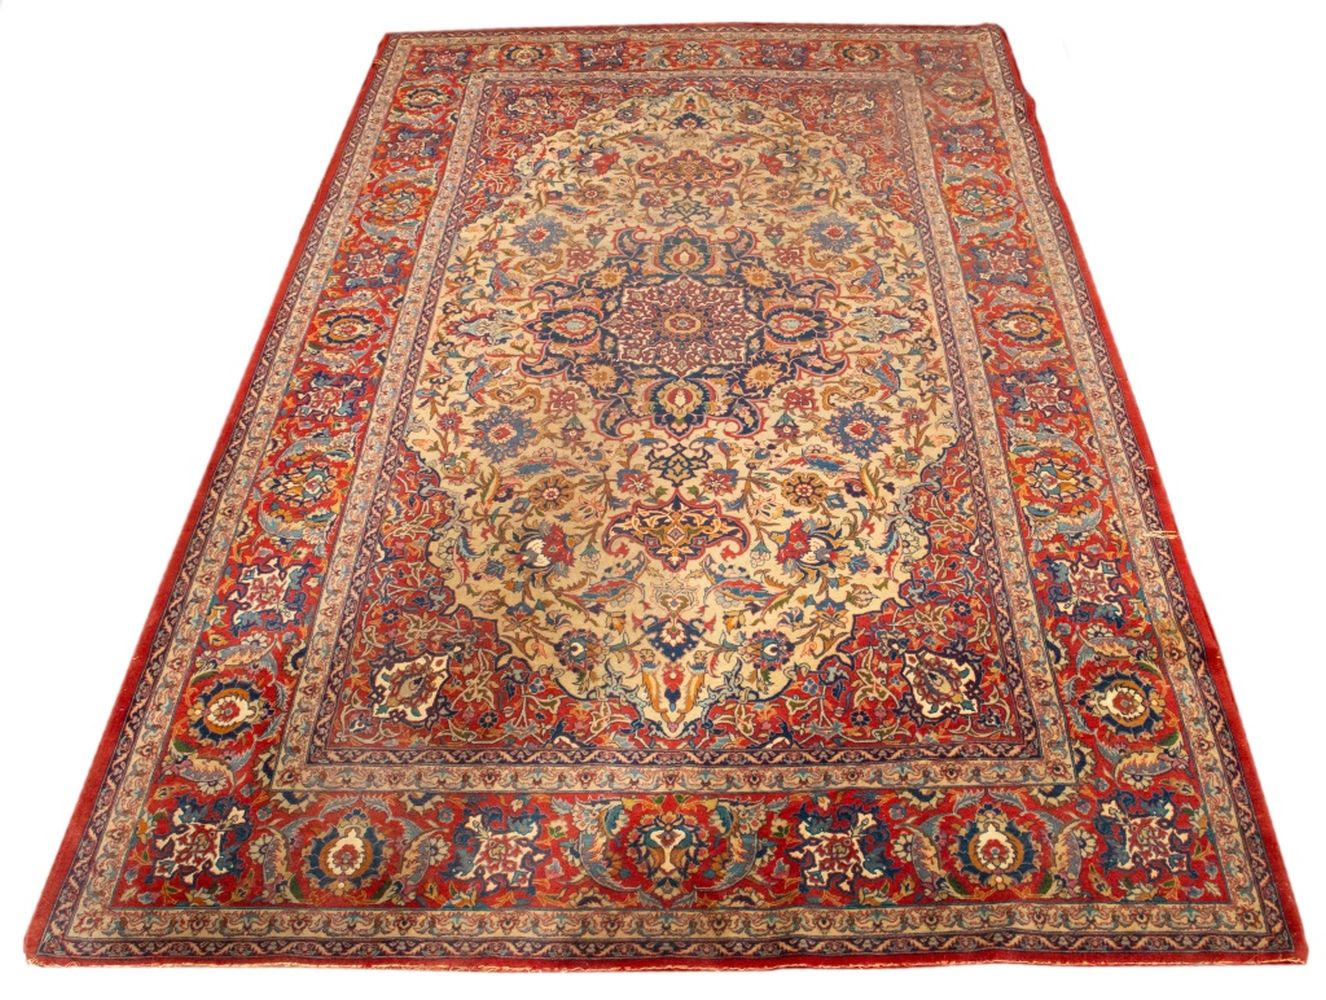 PERSIAN HAND-KNOTTED TABRIZ CARPET,